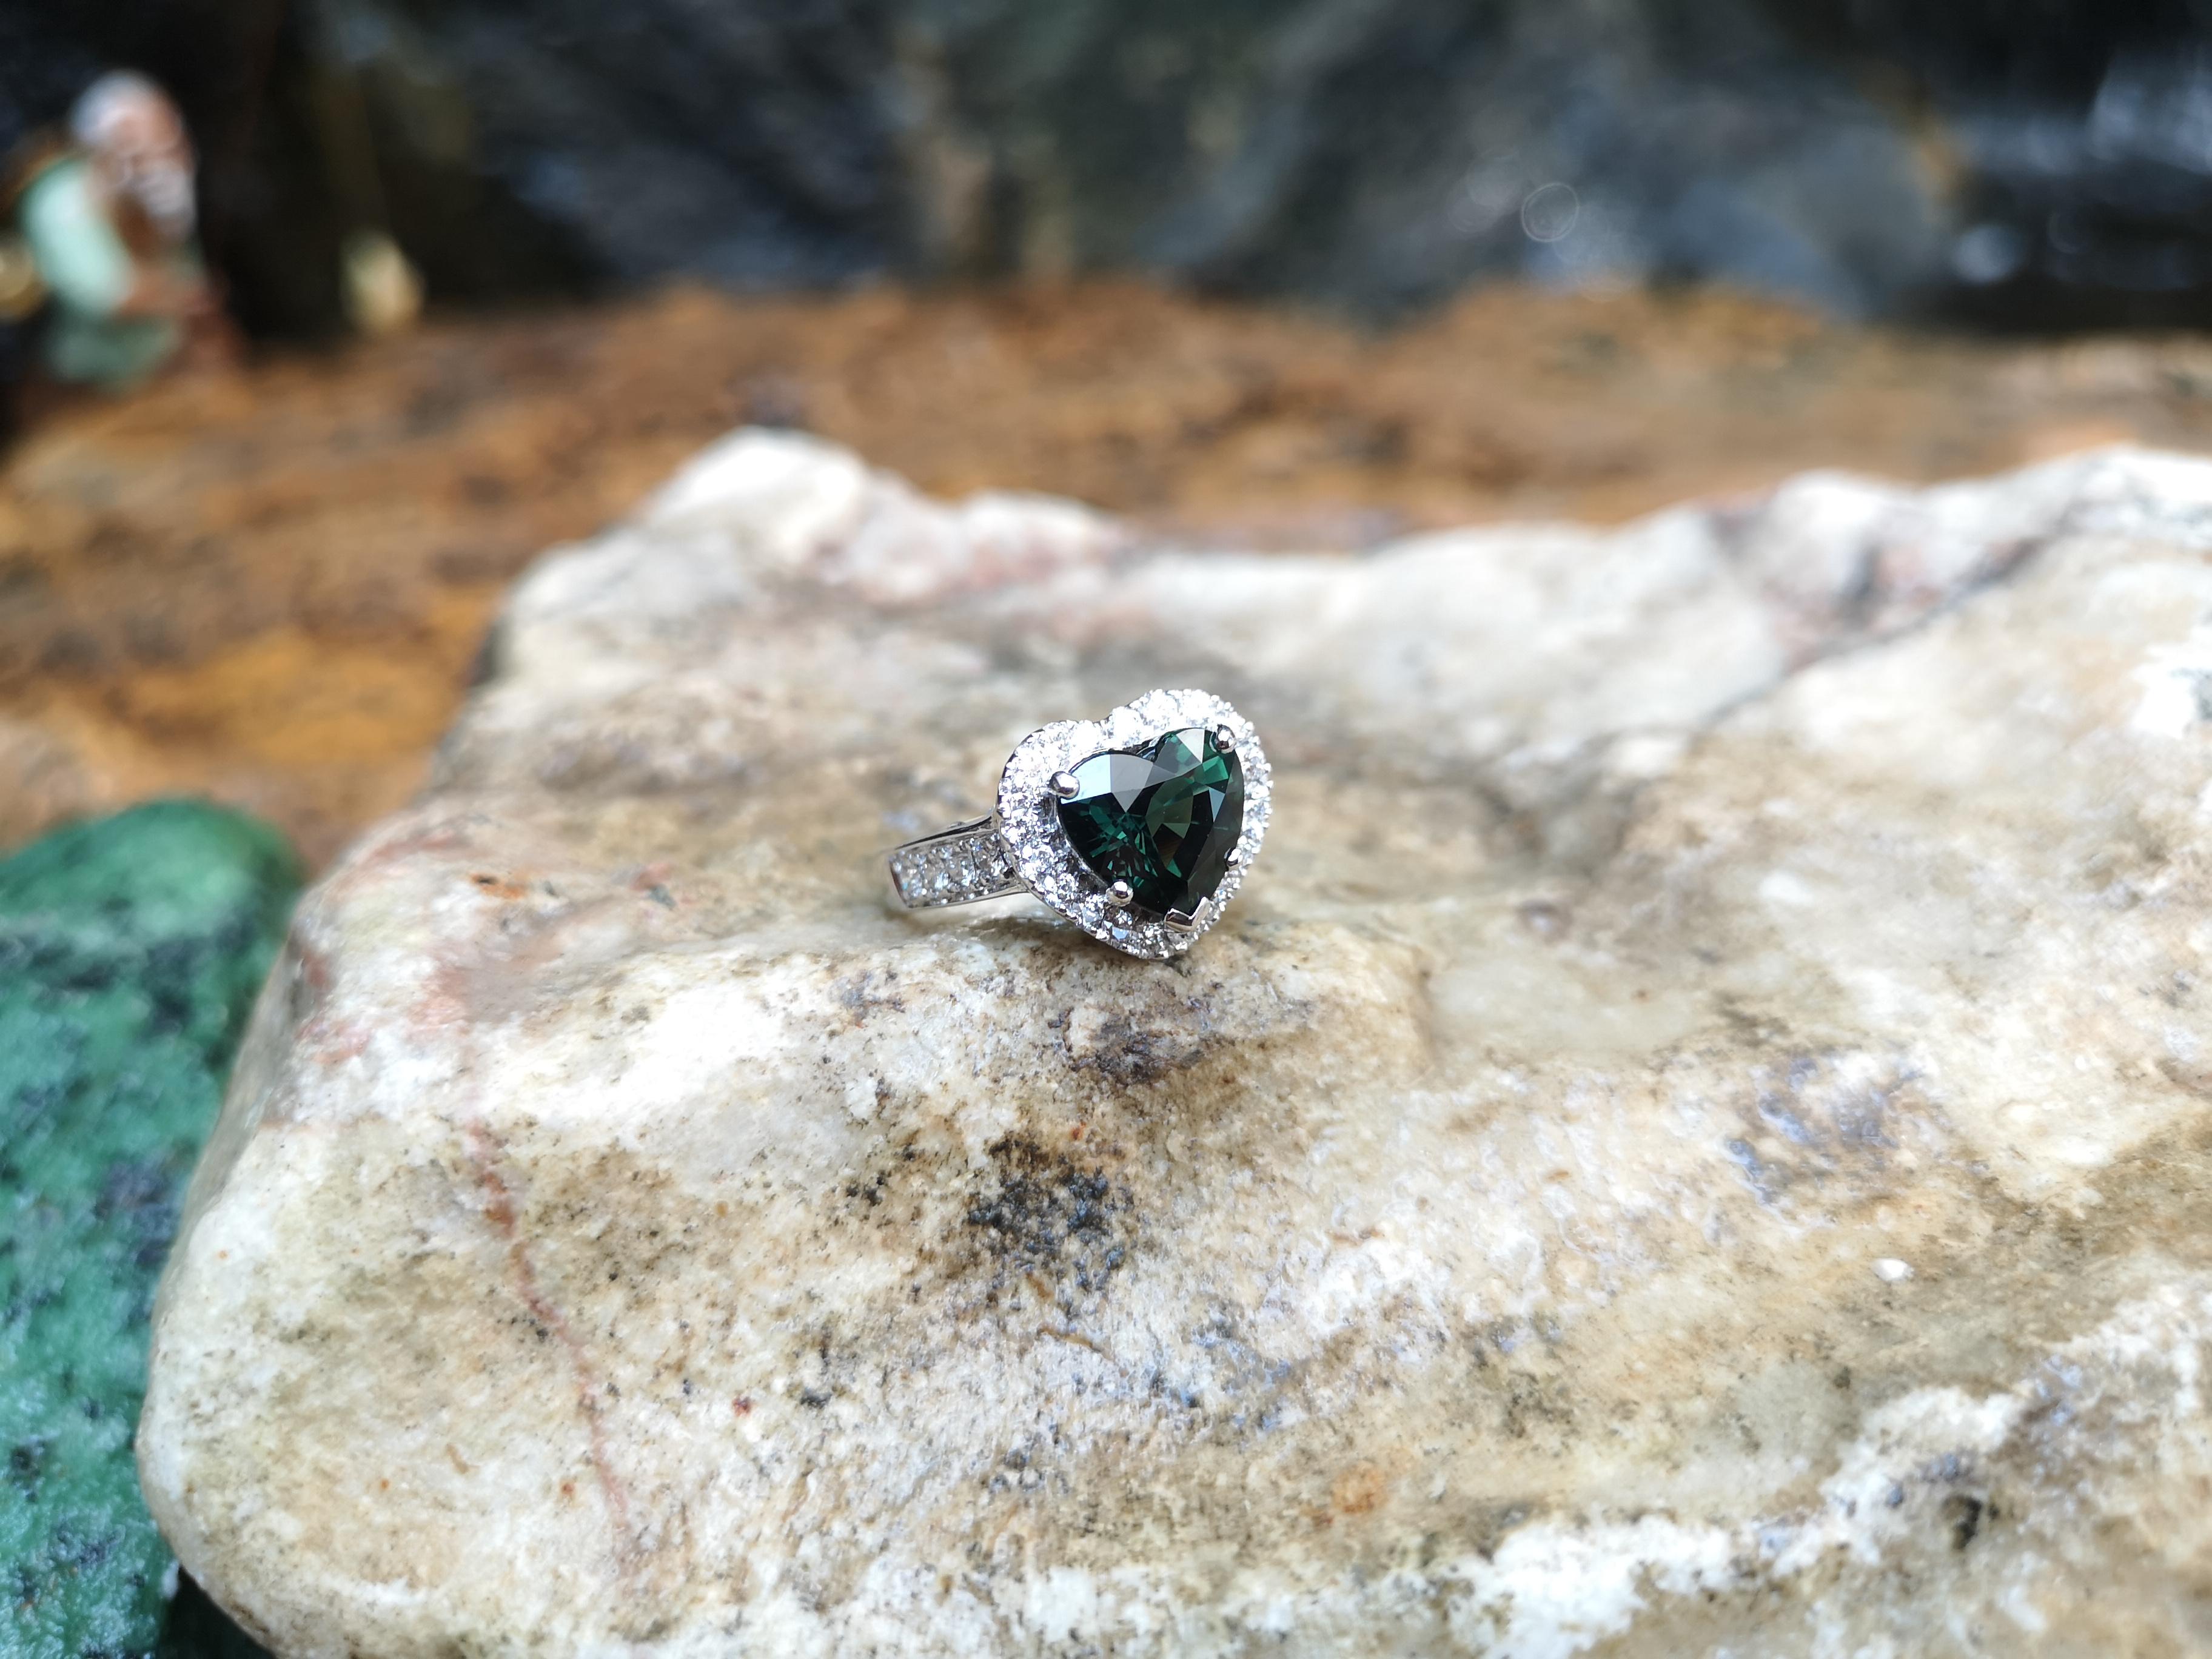 Green Sapphire 4.18 carats with Diamond 0.76 carat Ring set in 18 Karat White Gold Settings

Width:  1.5 cm 
Length: 1.3 cm
Ring Size: 53
Total Weight: 9.64 grams

